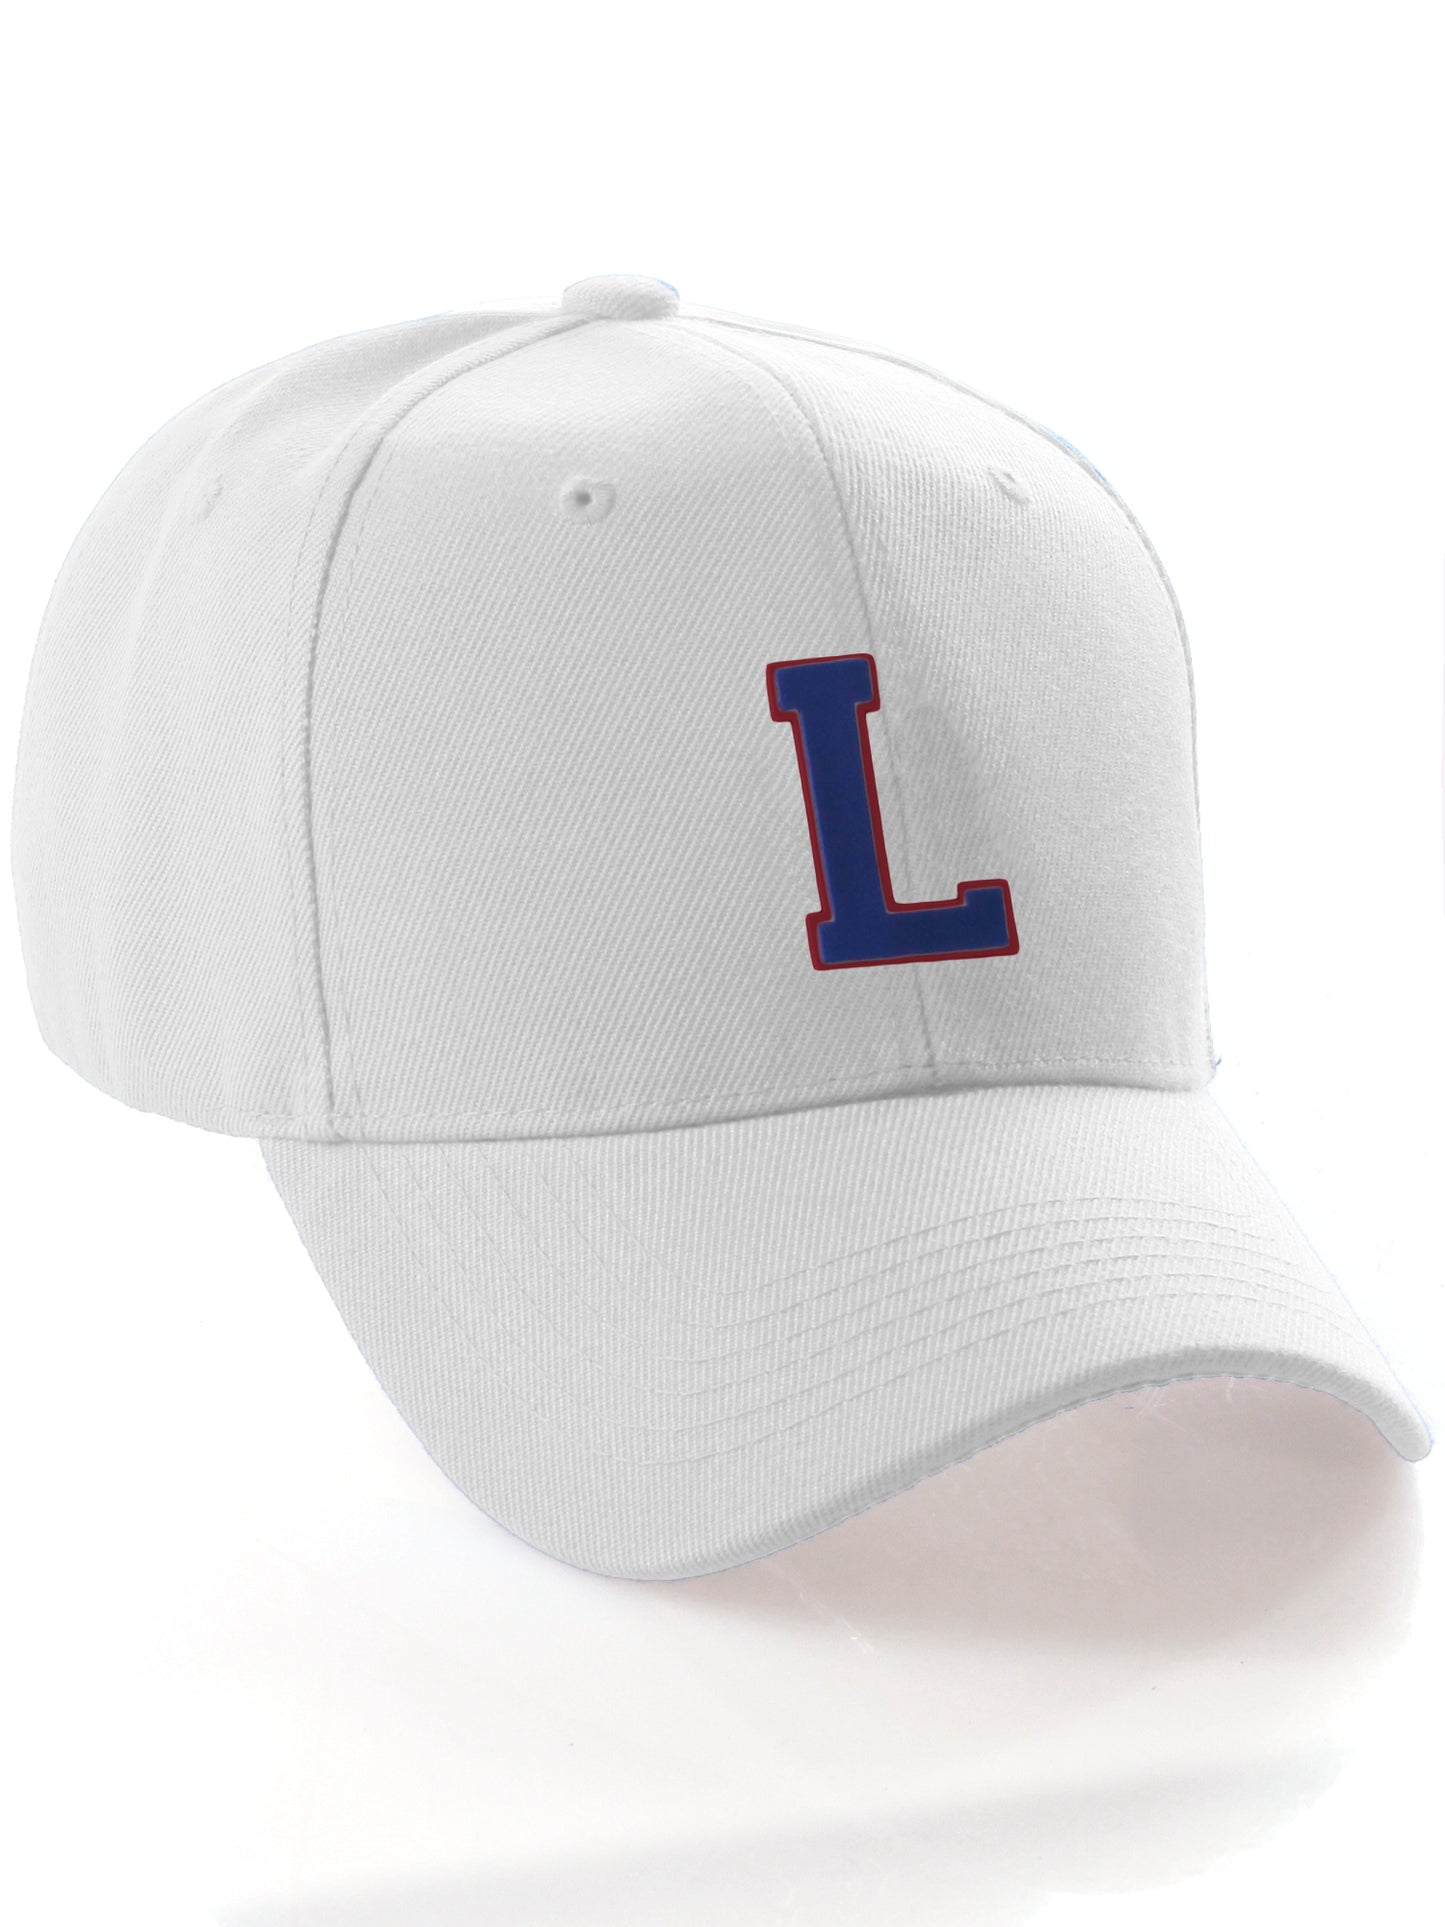 Classic Baseball Hat Custom A to Z Initial Team Letter, White Cap Red Blue